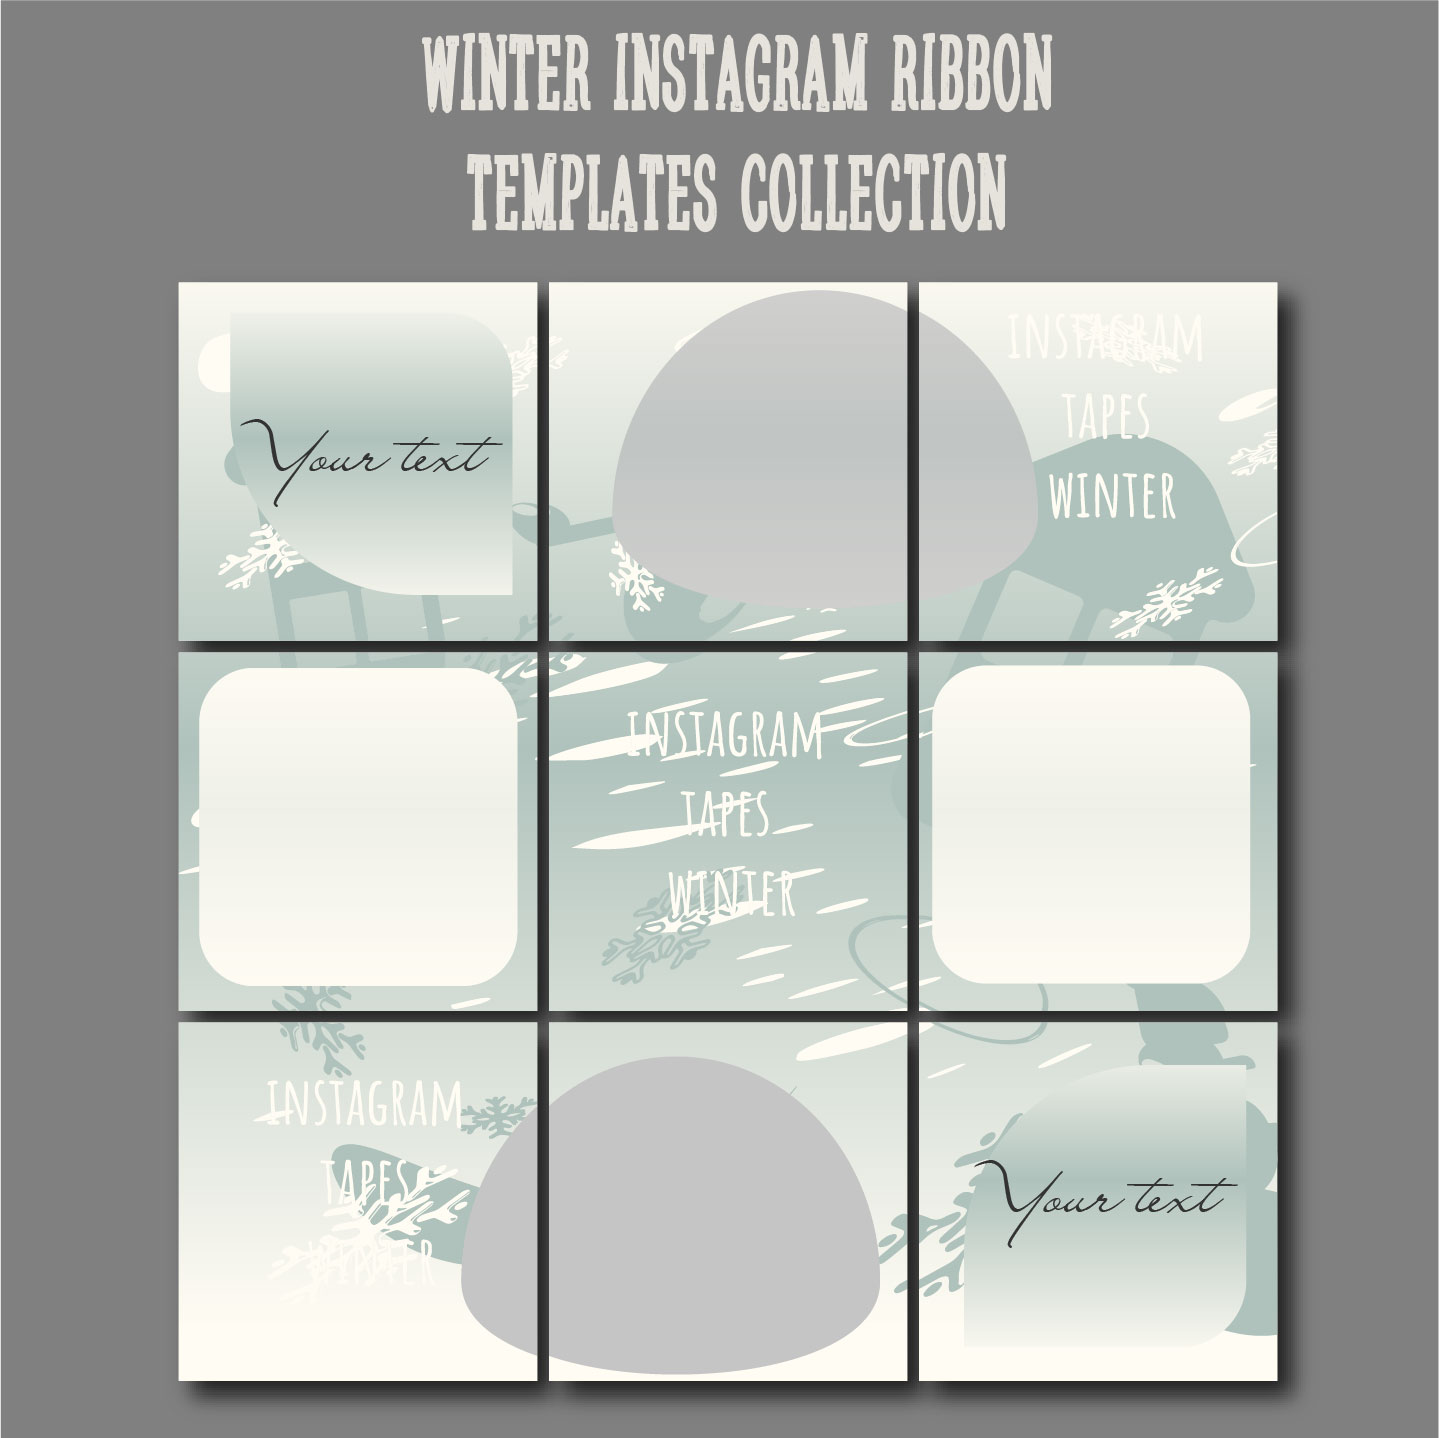 Winter instagram ribbon templates collection ad 1